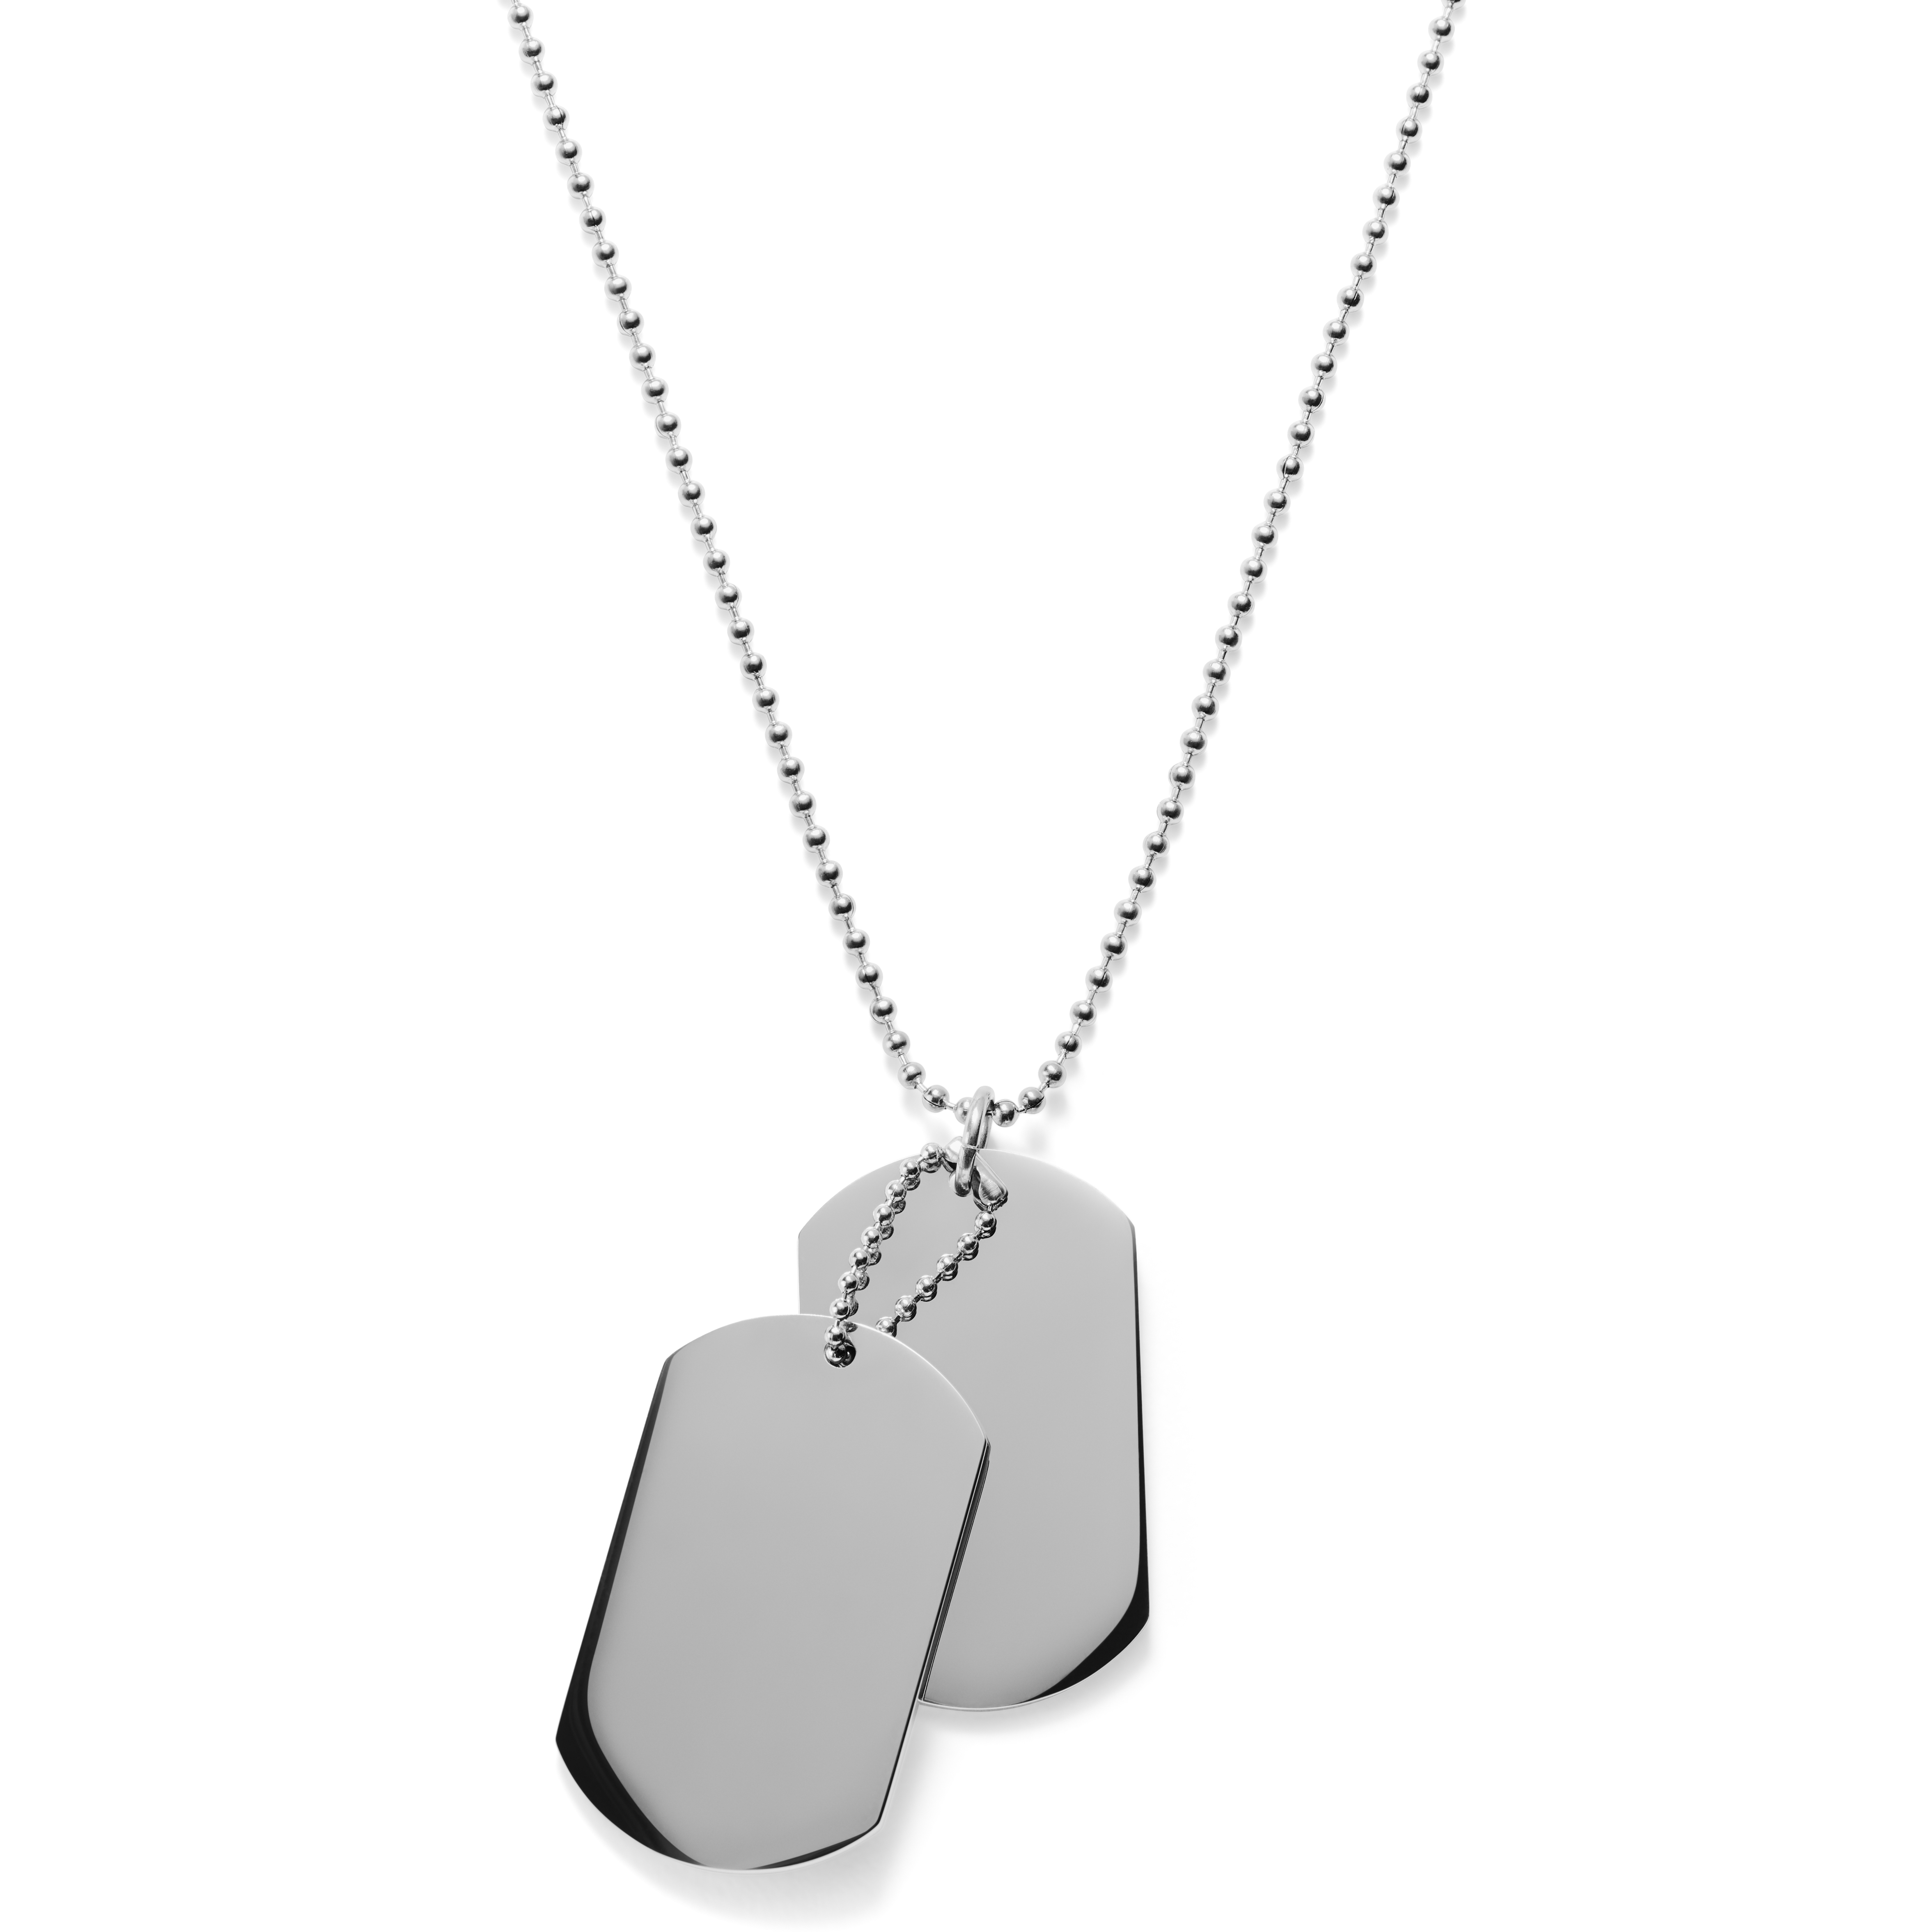 Silver-Tone Stainless Steel With Double Dog Tag Ball Chain Necklace